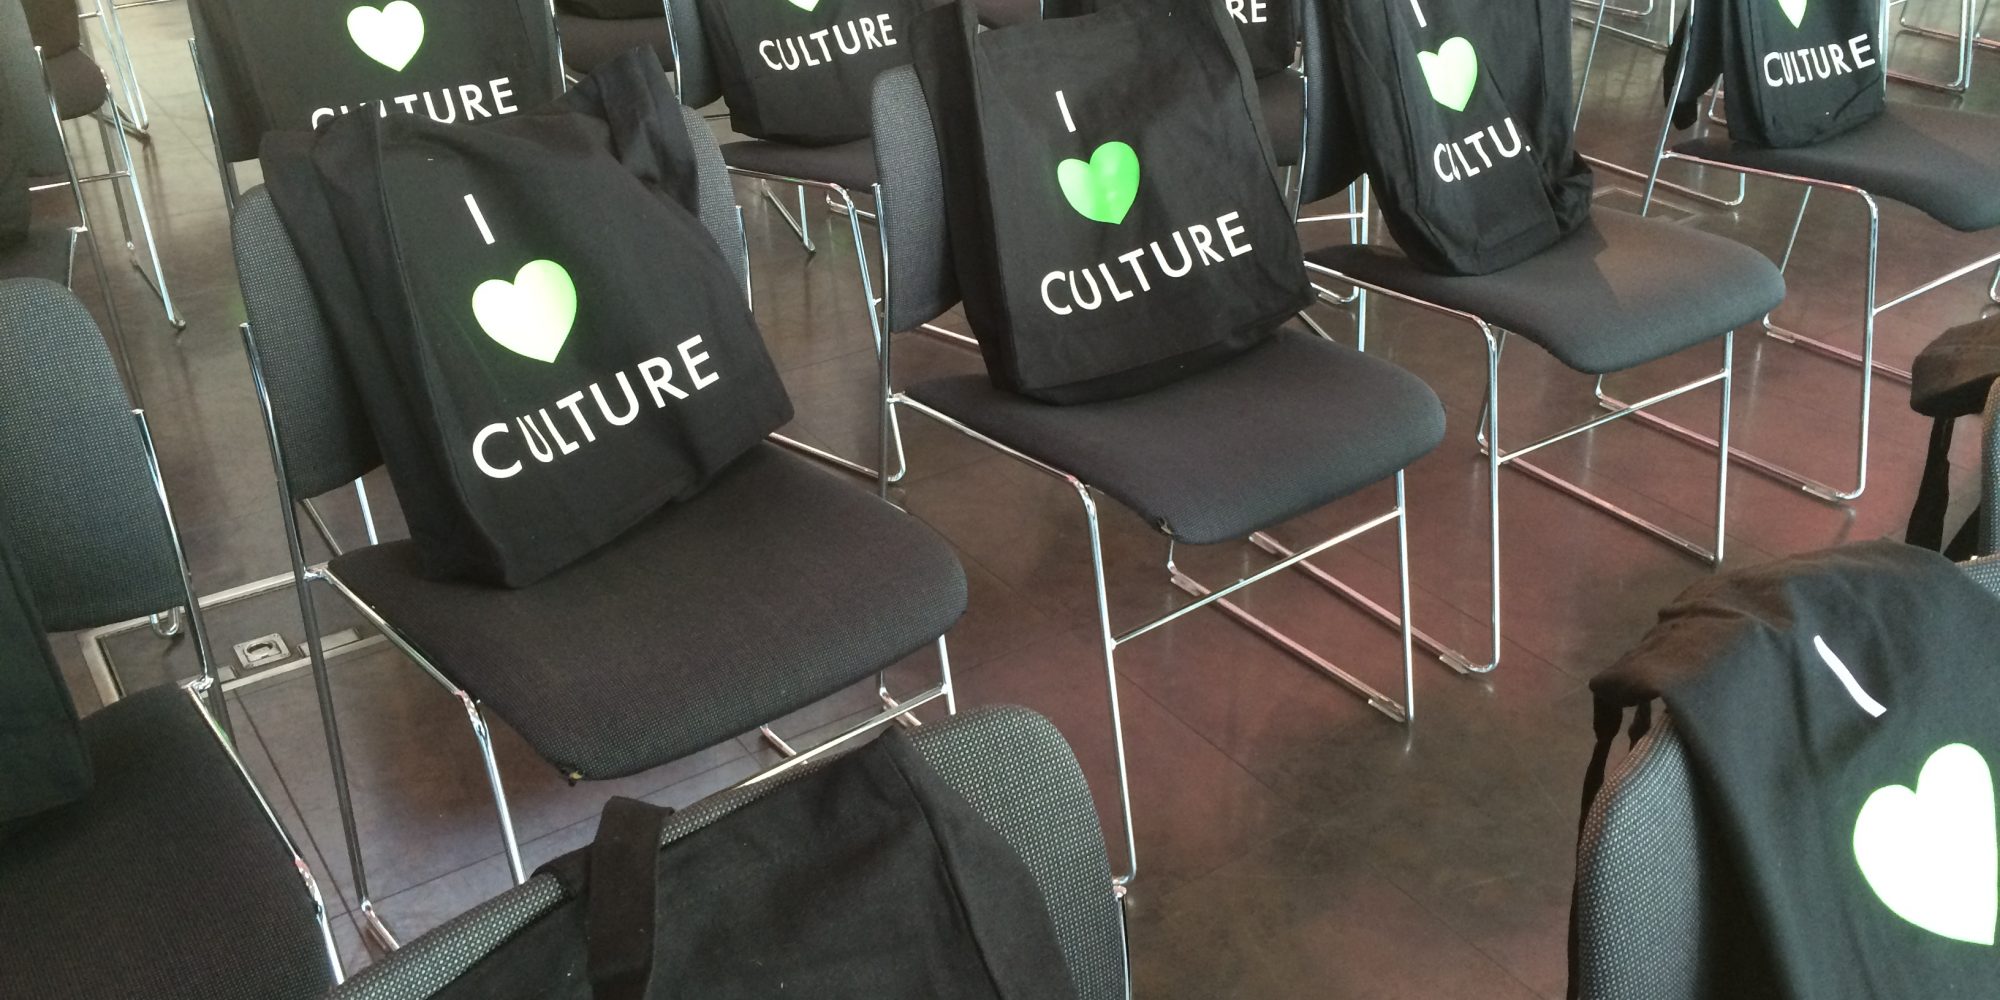 'I Love Culture' totes bags sitting on chairs. Naming ourselves CT Consults